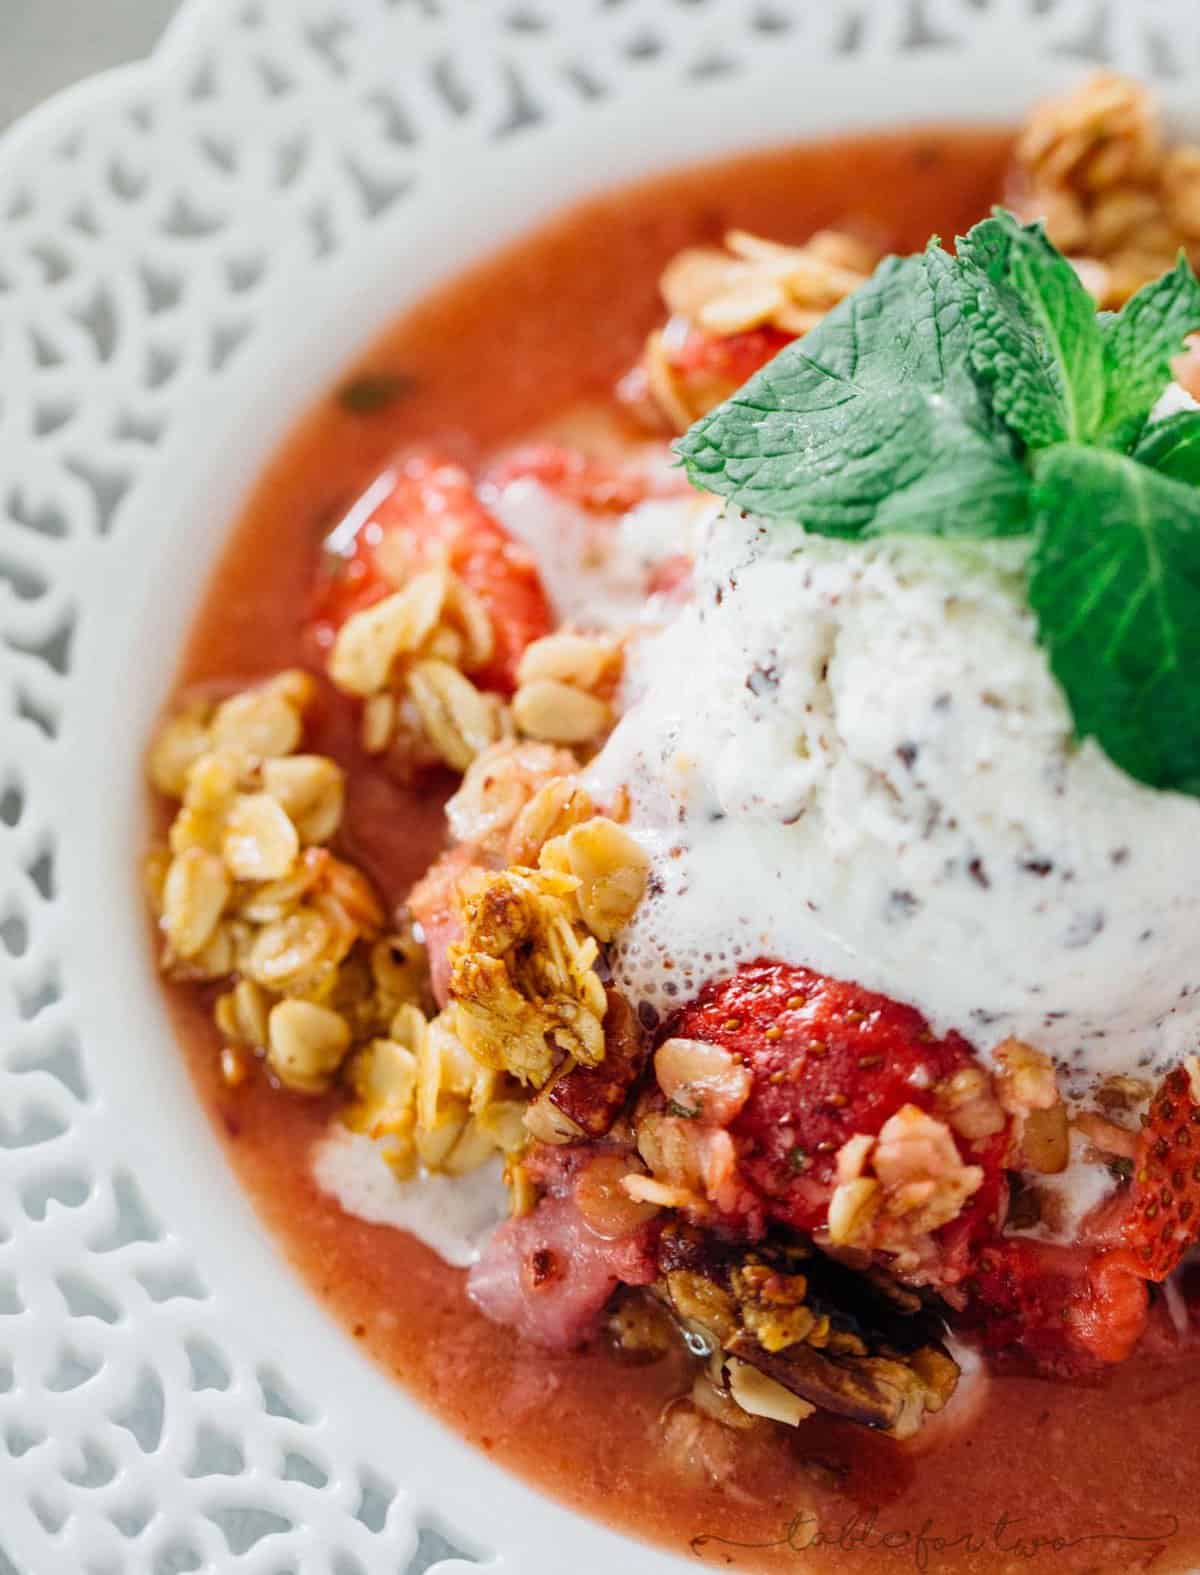 A quick and easy way to use up all your fresh mint from the garden and the fresh strawberries of the season! Strawberry mint crisp is an easy dessert with the most flavorful crisp topping! Don't forget the ice cream scoop on top!